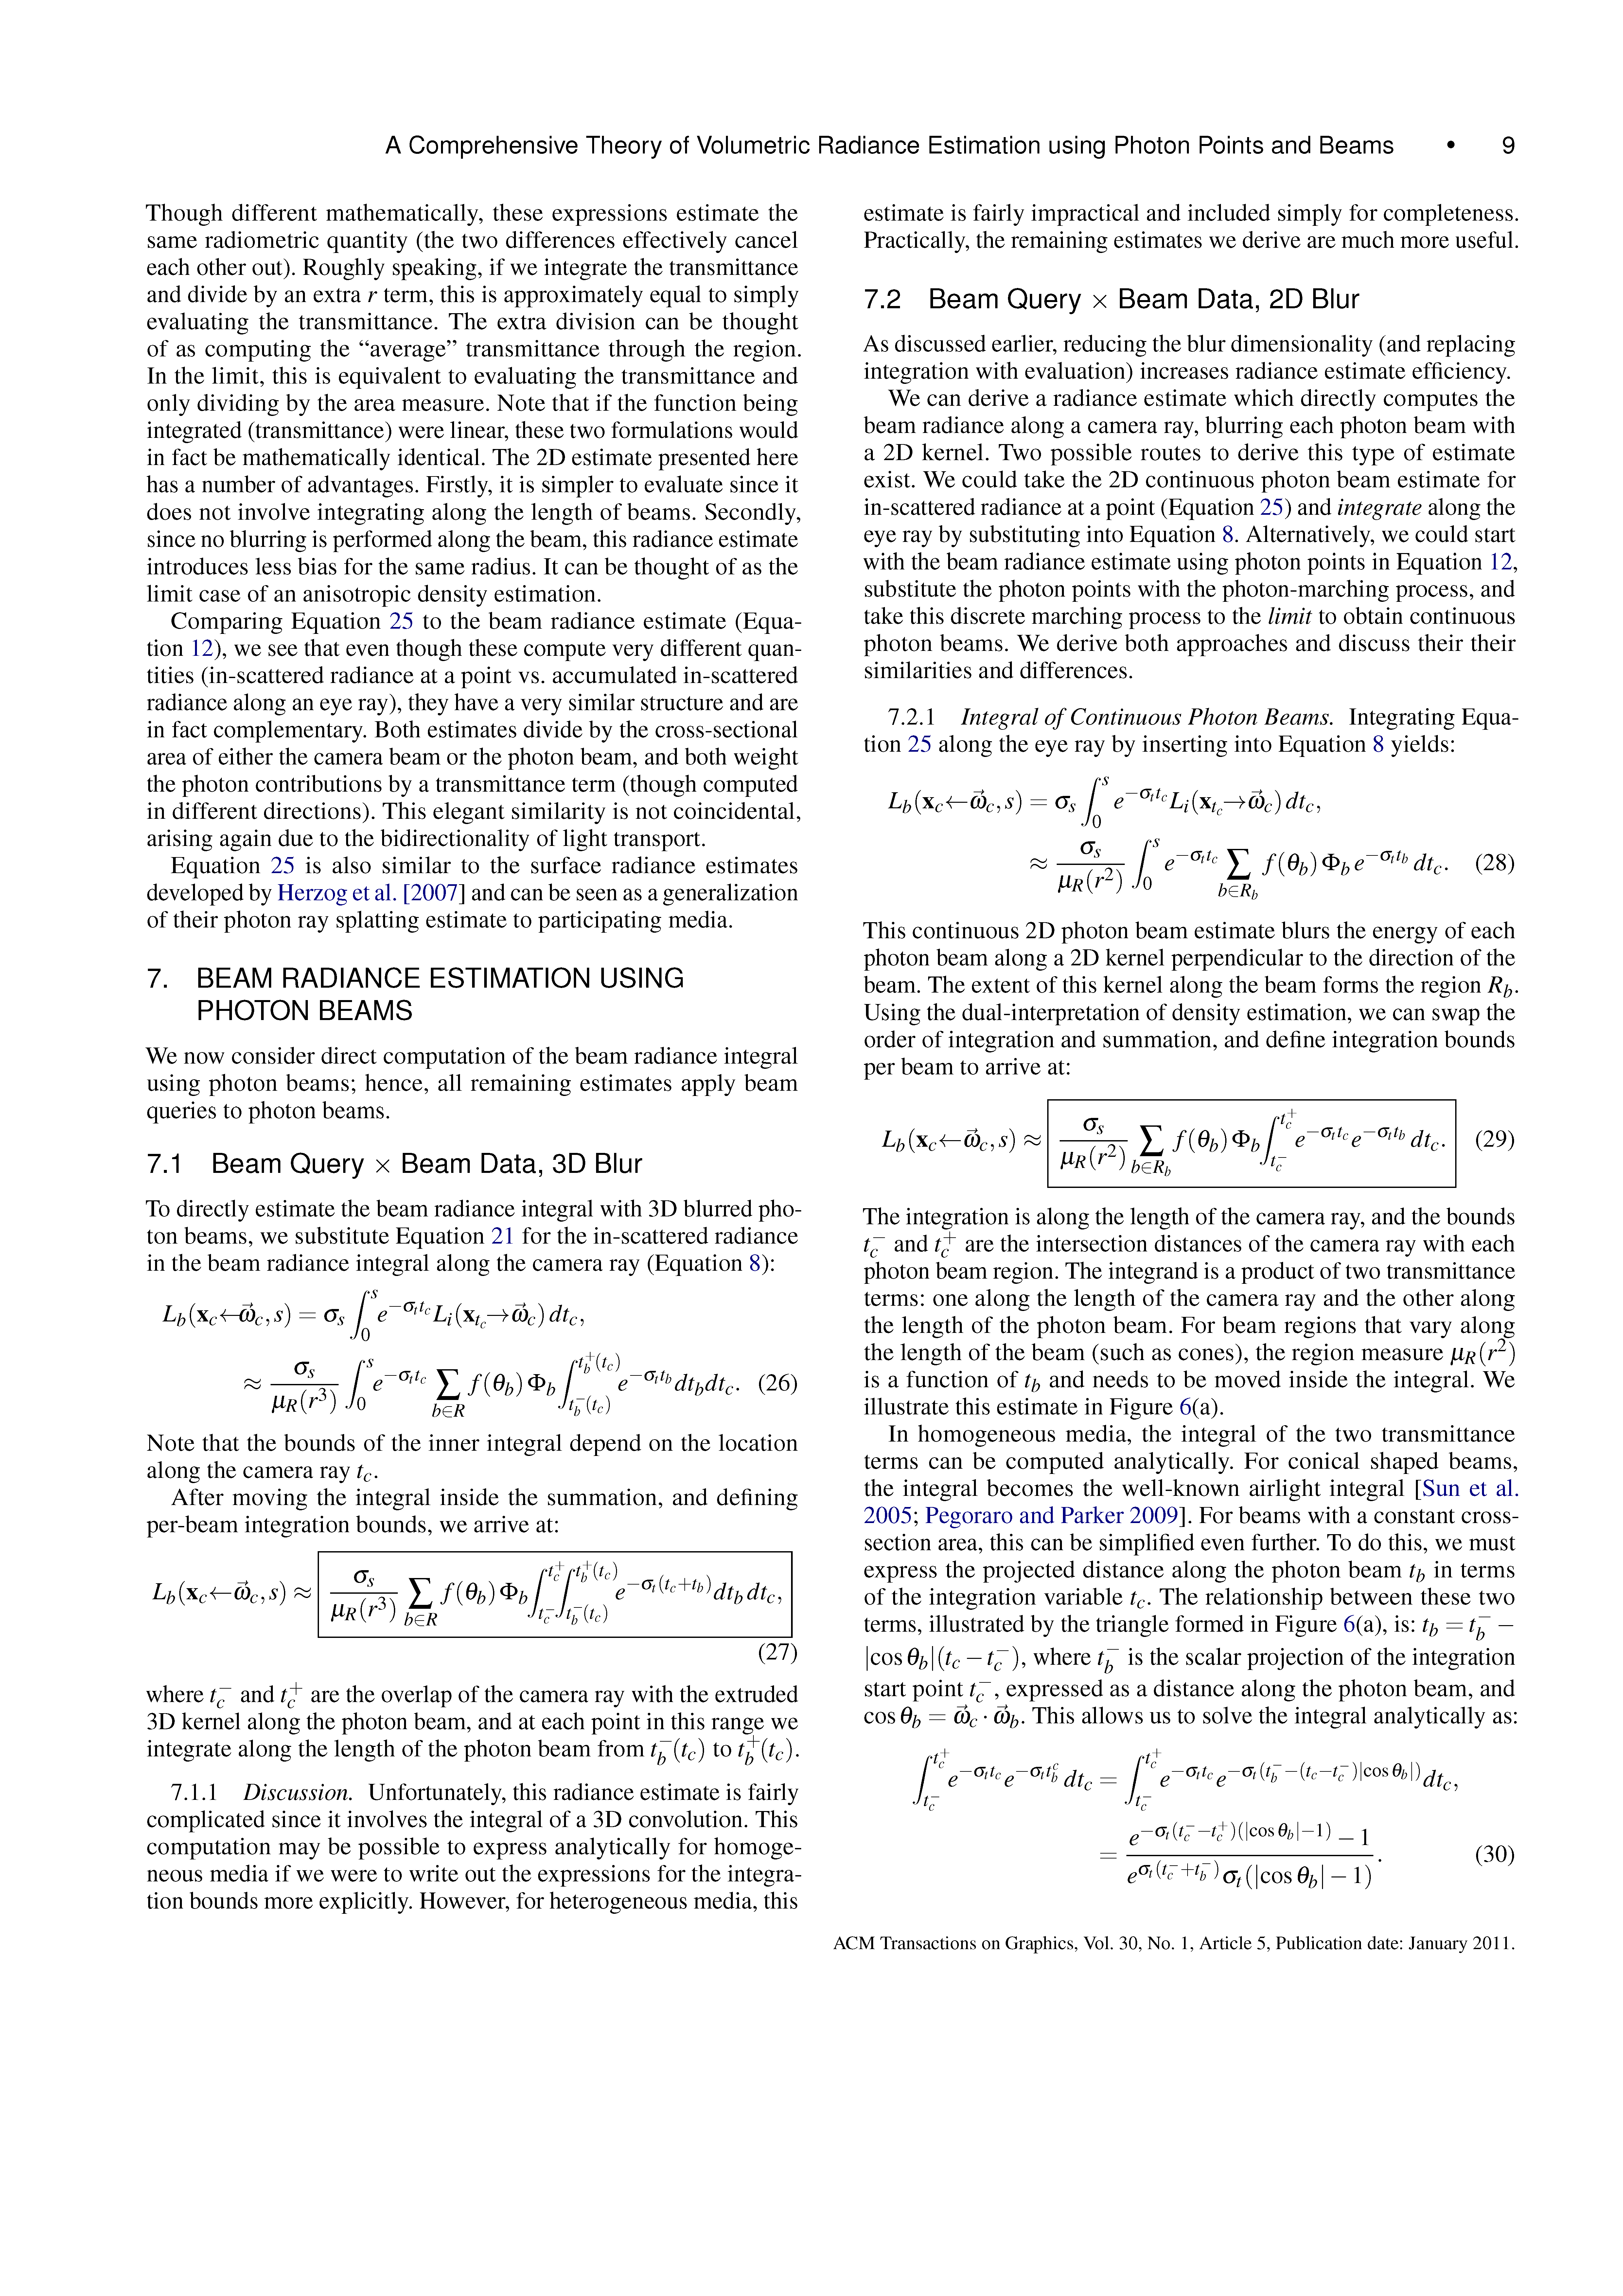 A Comprehensive Theory of Volumetric Radiance Estimation Using Photon Points and Beams Page 9